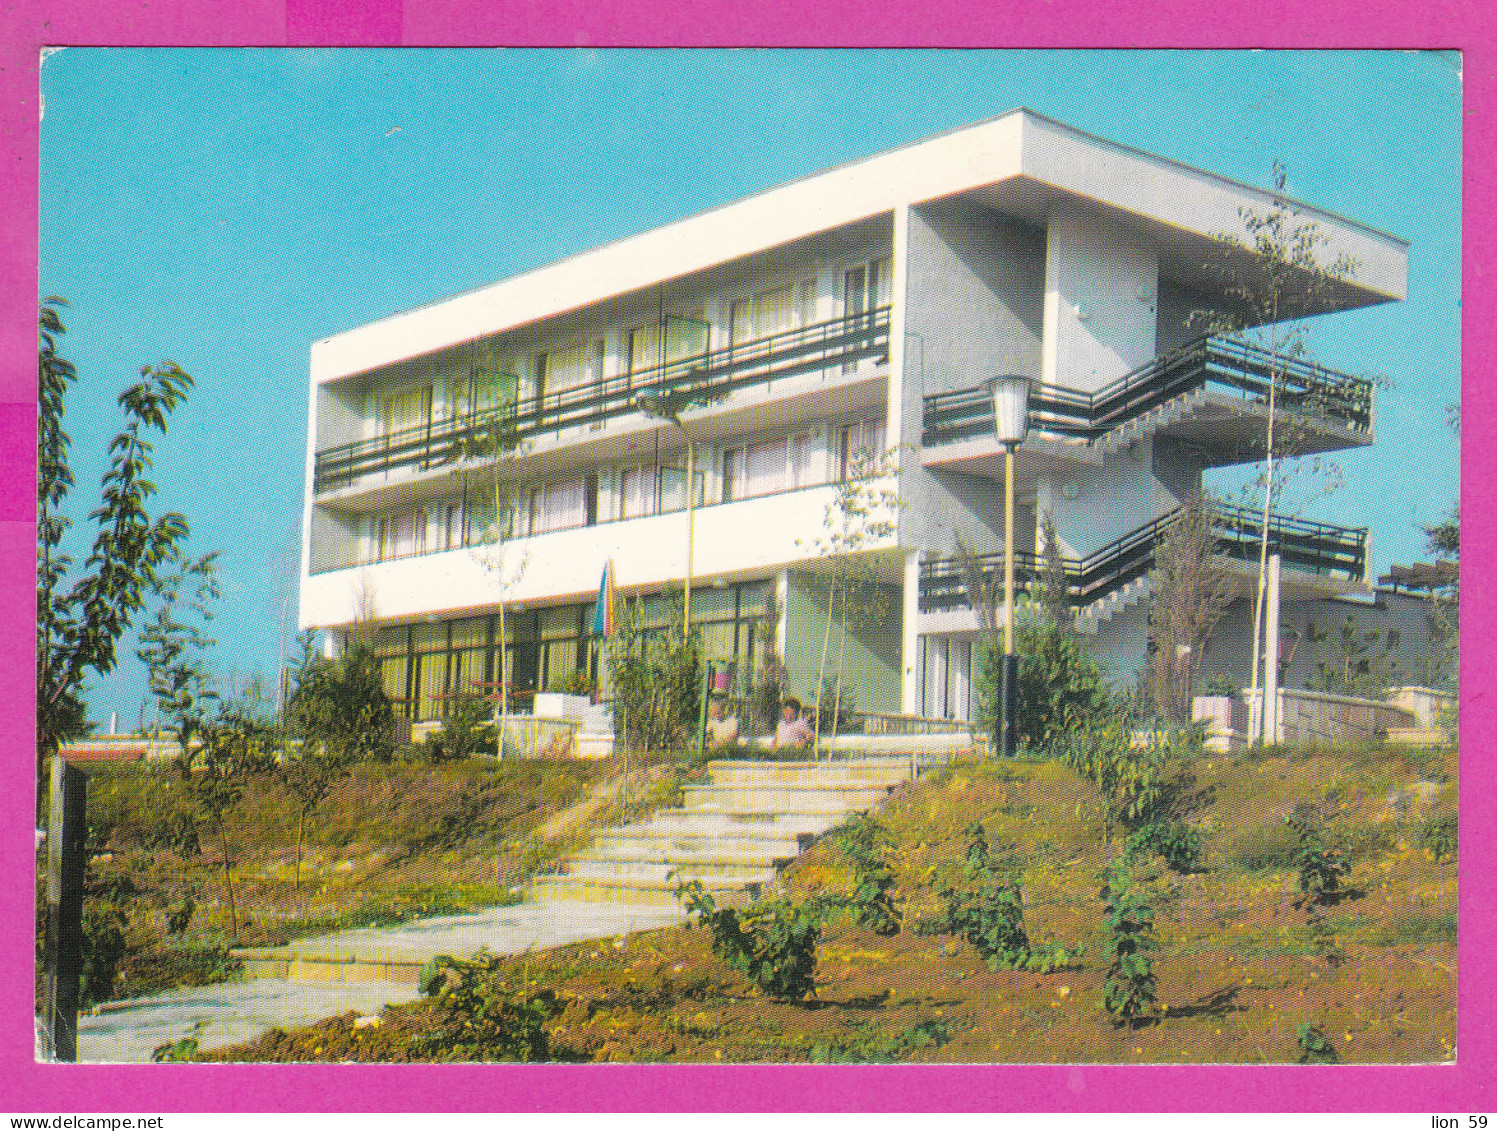 310621 / Bulgaria - Kiten ( Burgas Region) Hotel , Rest Station Of The Central Council Of Bulgarian Trade Unions 1977 PC - Hotels & Restaurants